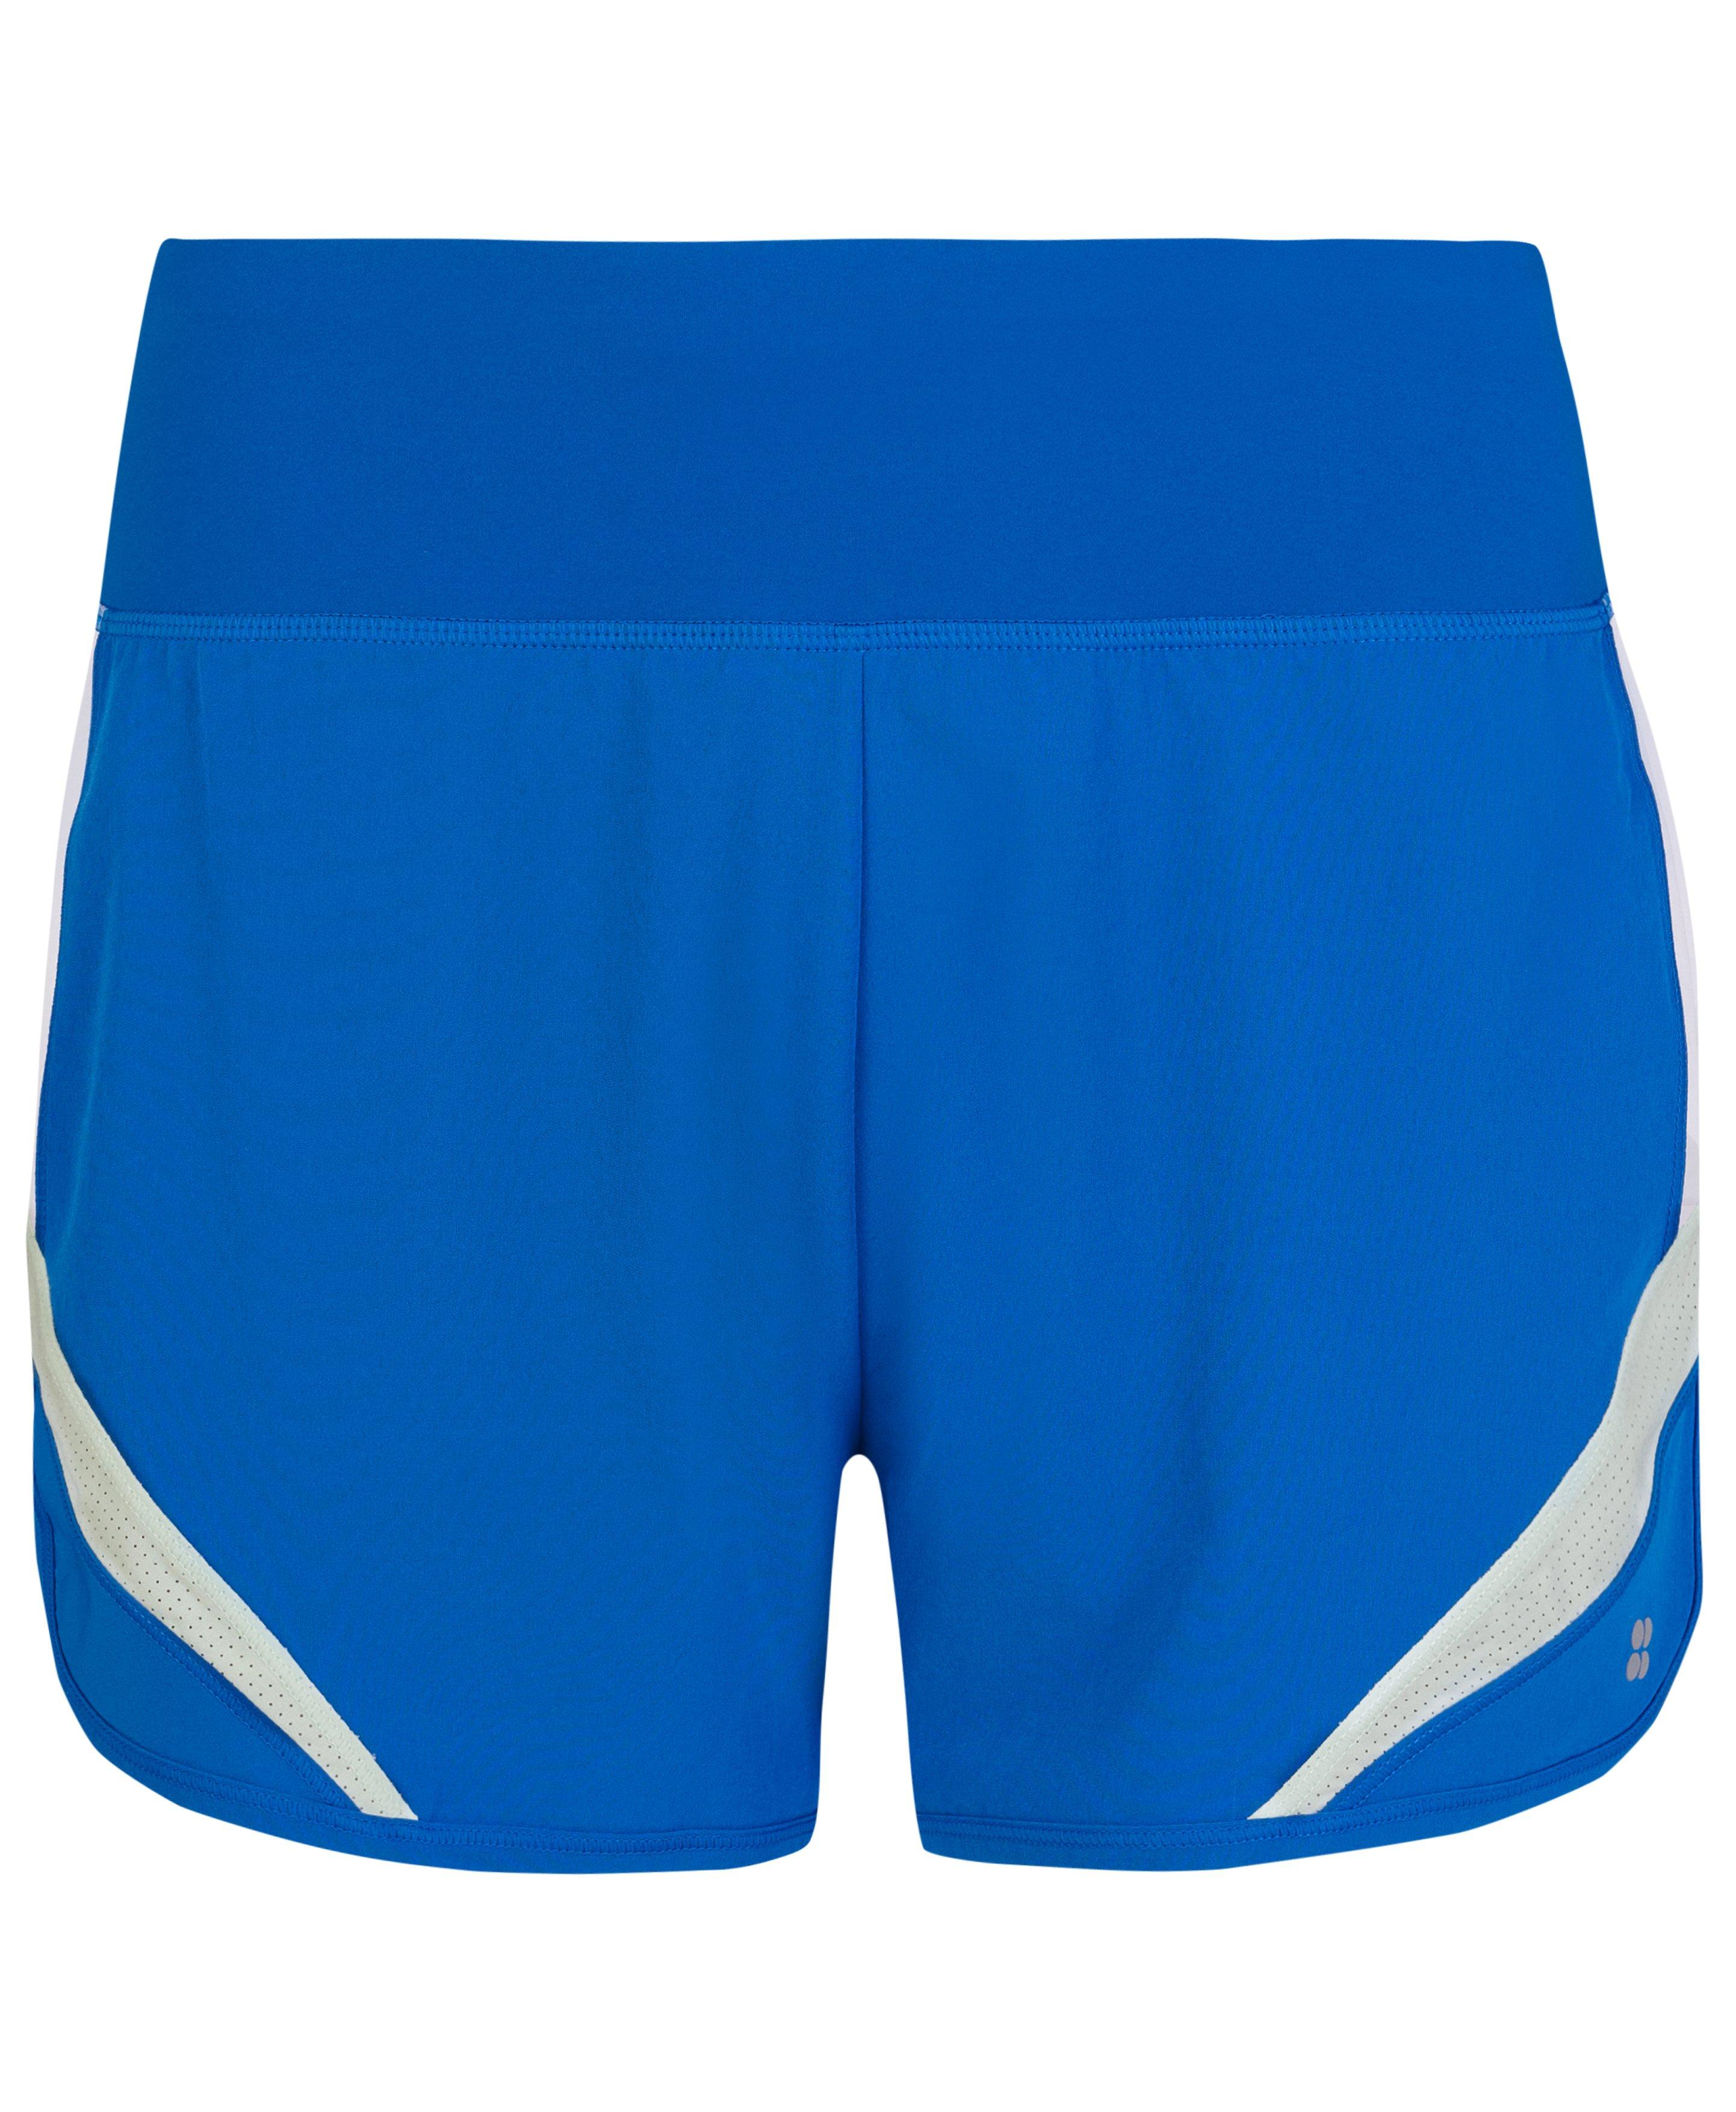 New product Drop: lululemon Speed Up Shorts and More